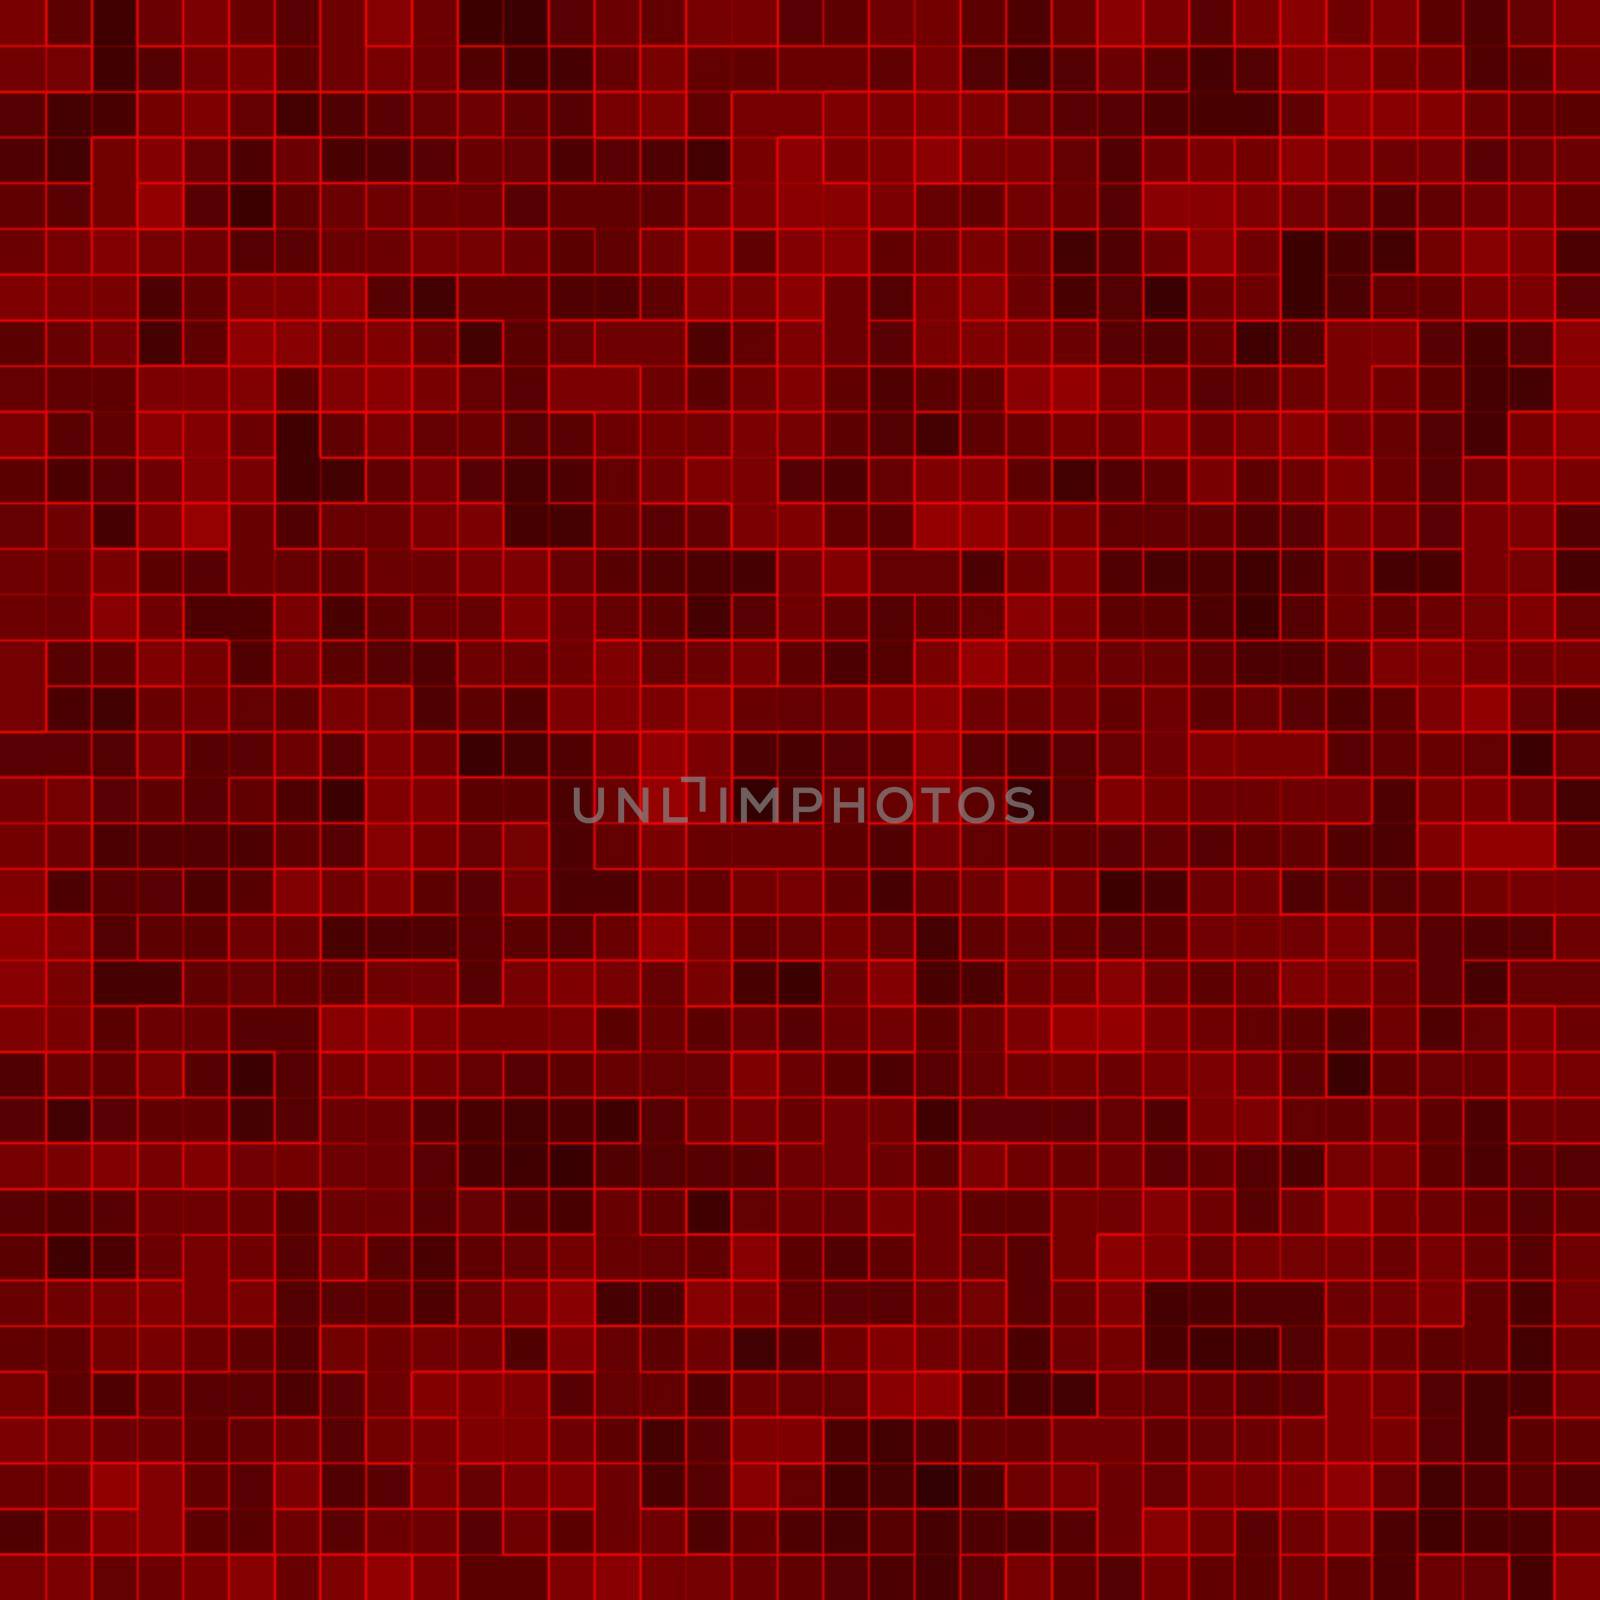 Red ceramic glass colorful tiles mosaic composition pattern background